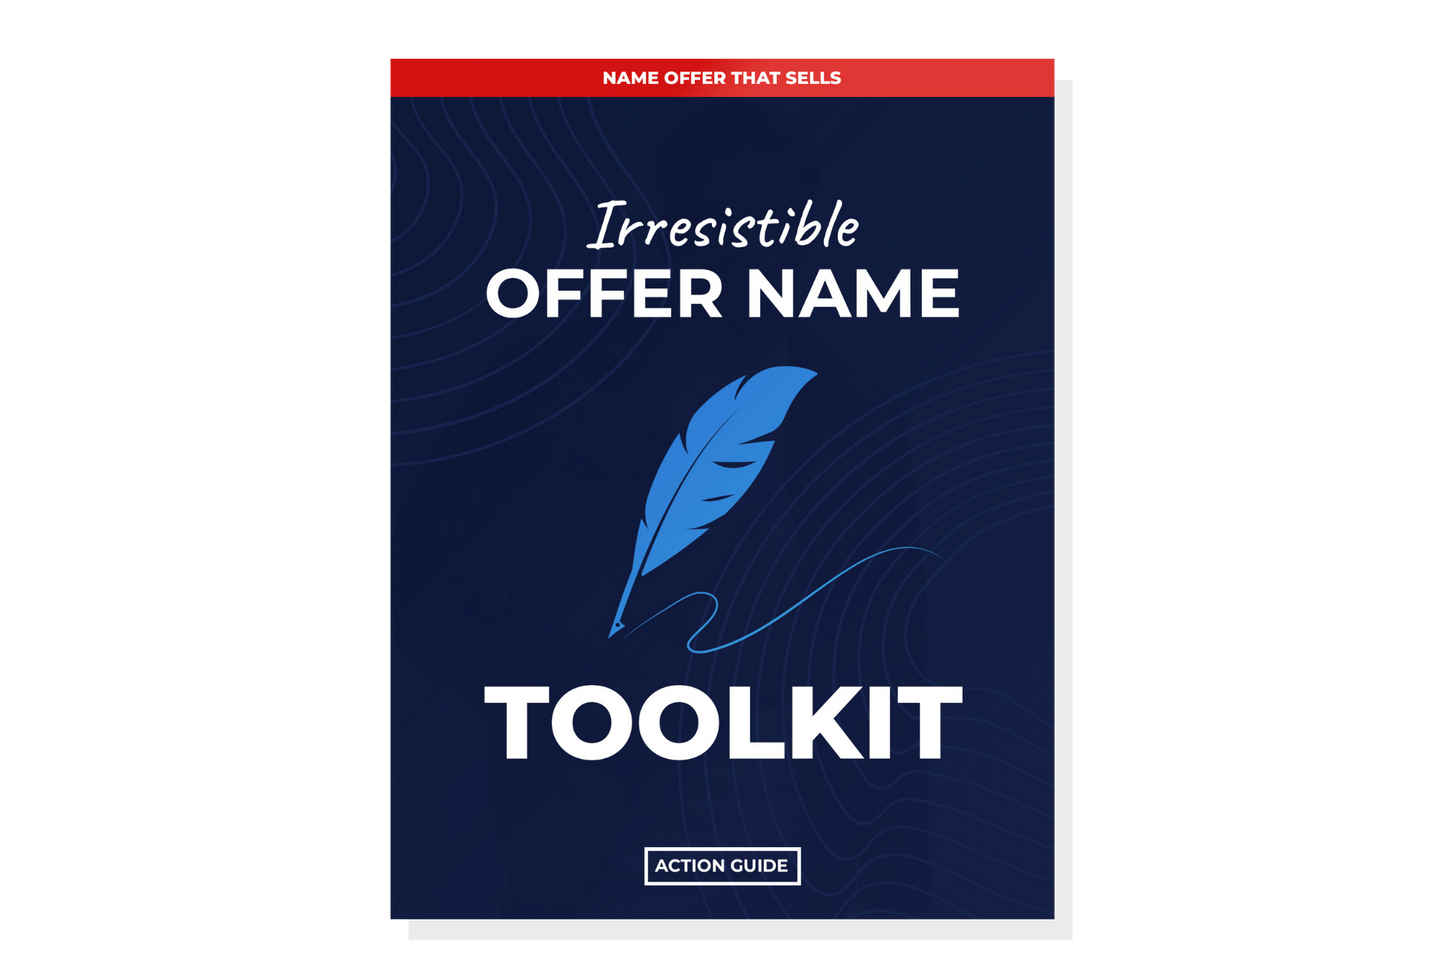 Irresistible Offer Name Toolkit (Action Guide)